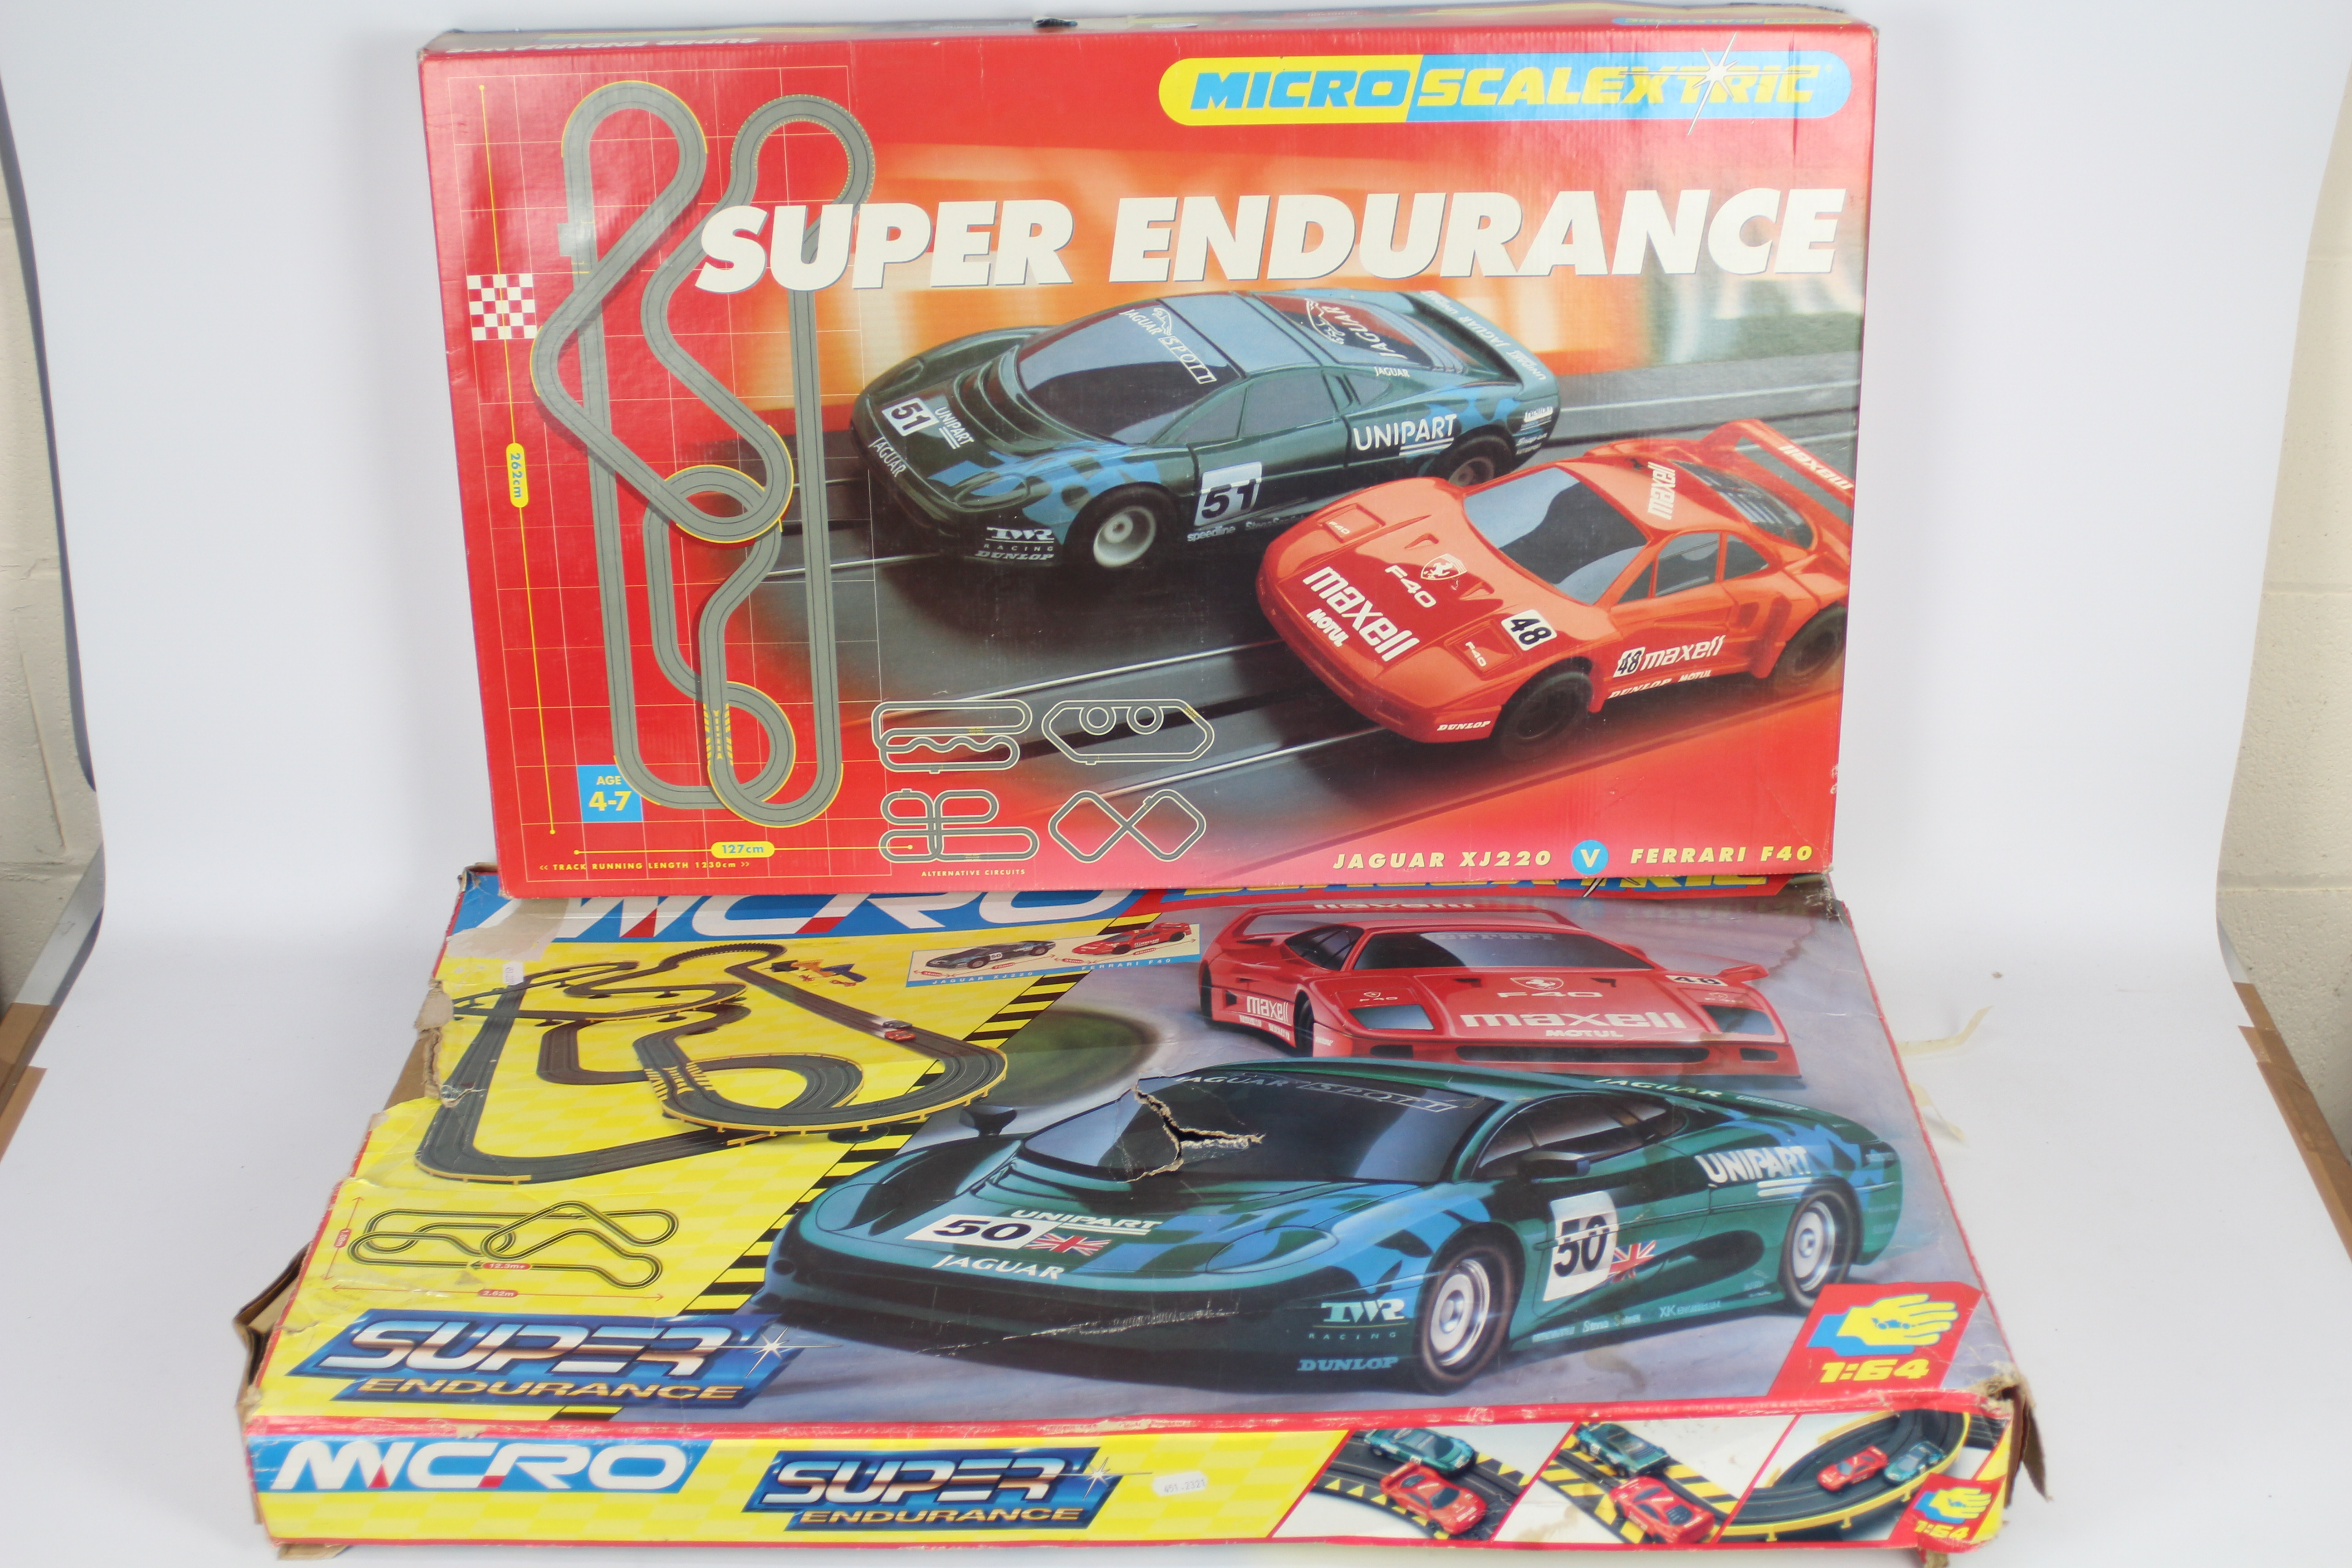 Scalextric - 2 x boxed # G090 Micro Scalextric Super Endurance sets in 1:64 scale.